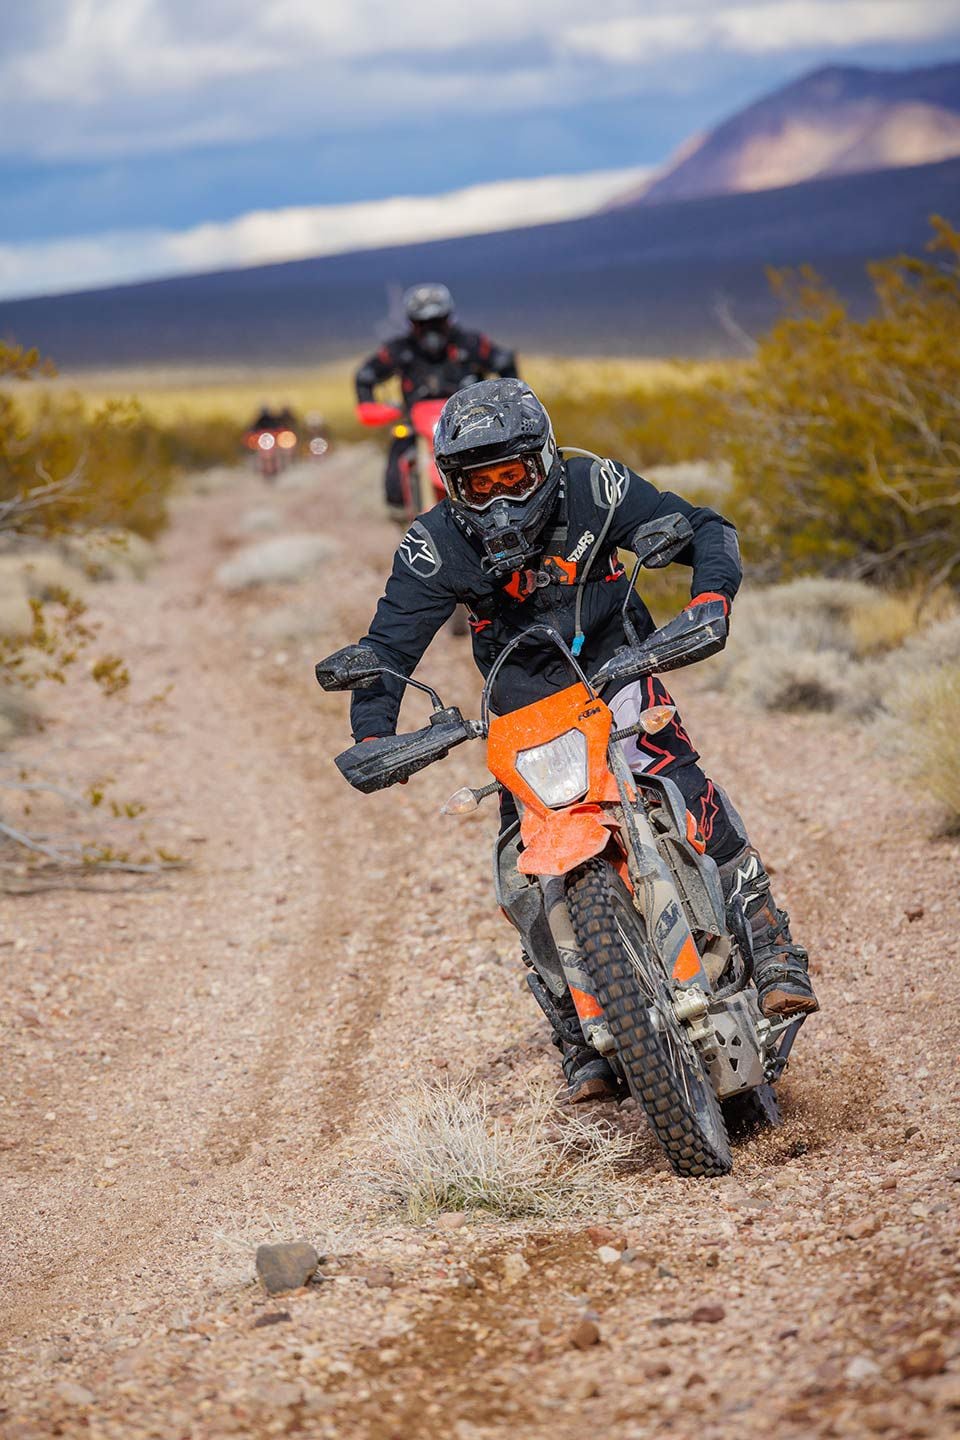 Off-road, the Tech-Air system can differentiate between a heavy load on the bike and an actual crash, determining if the airbag bladder needs to be inflated or not.